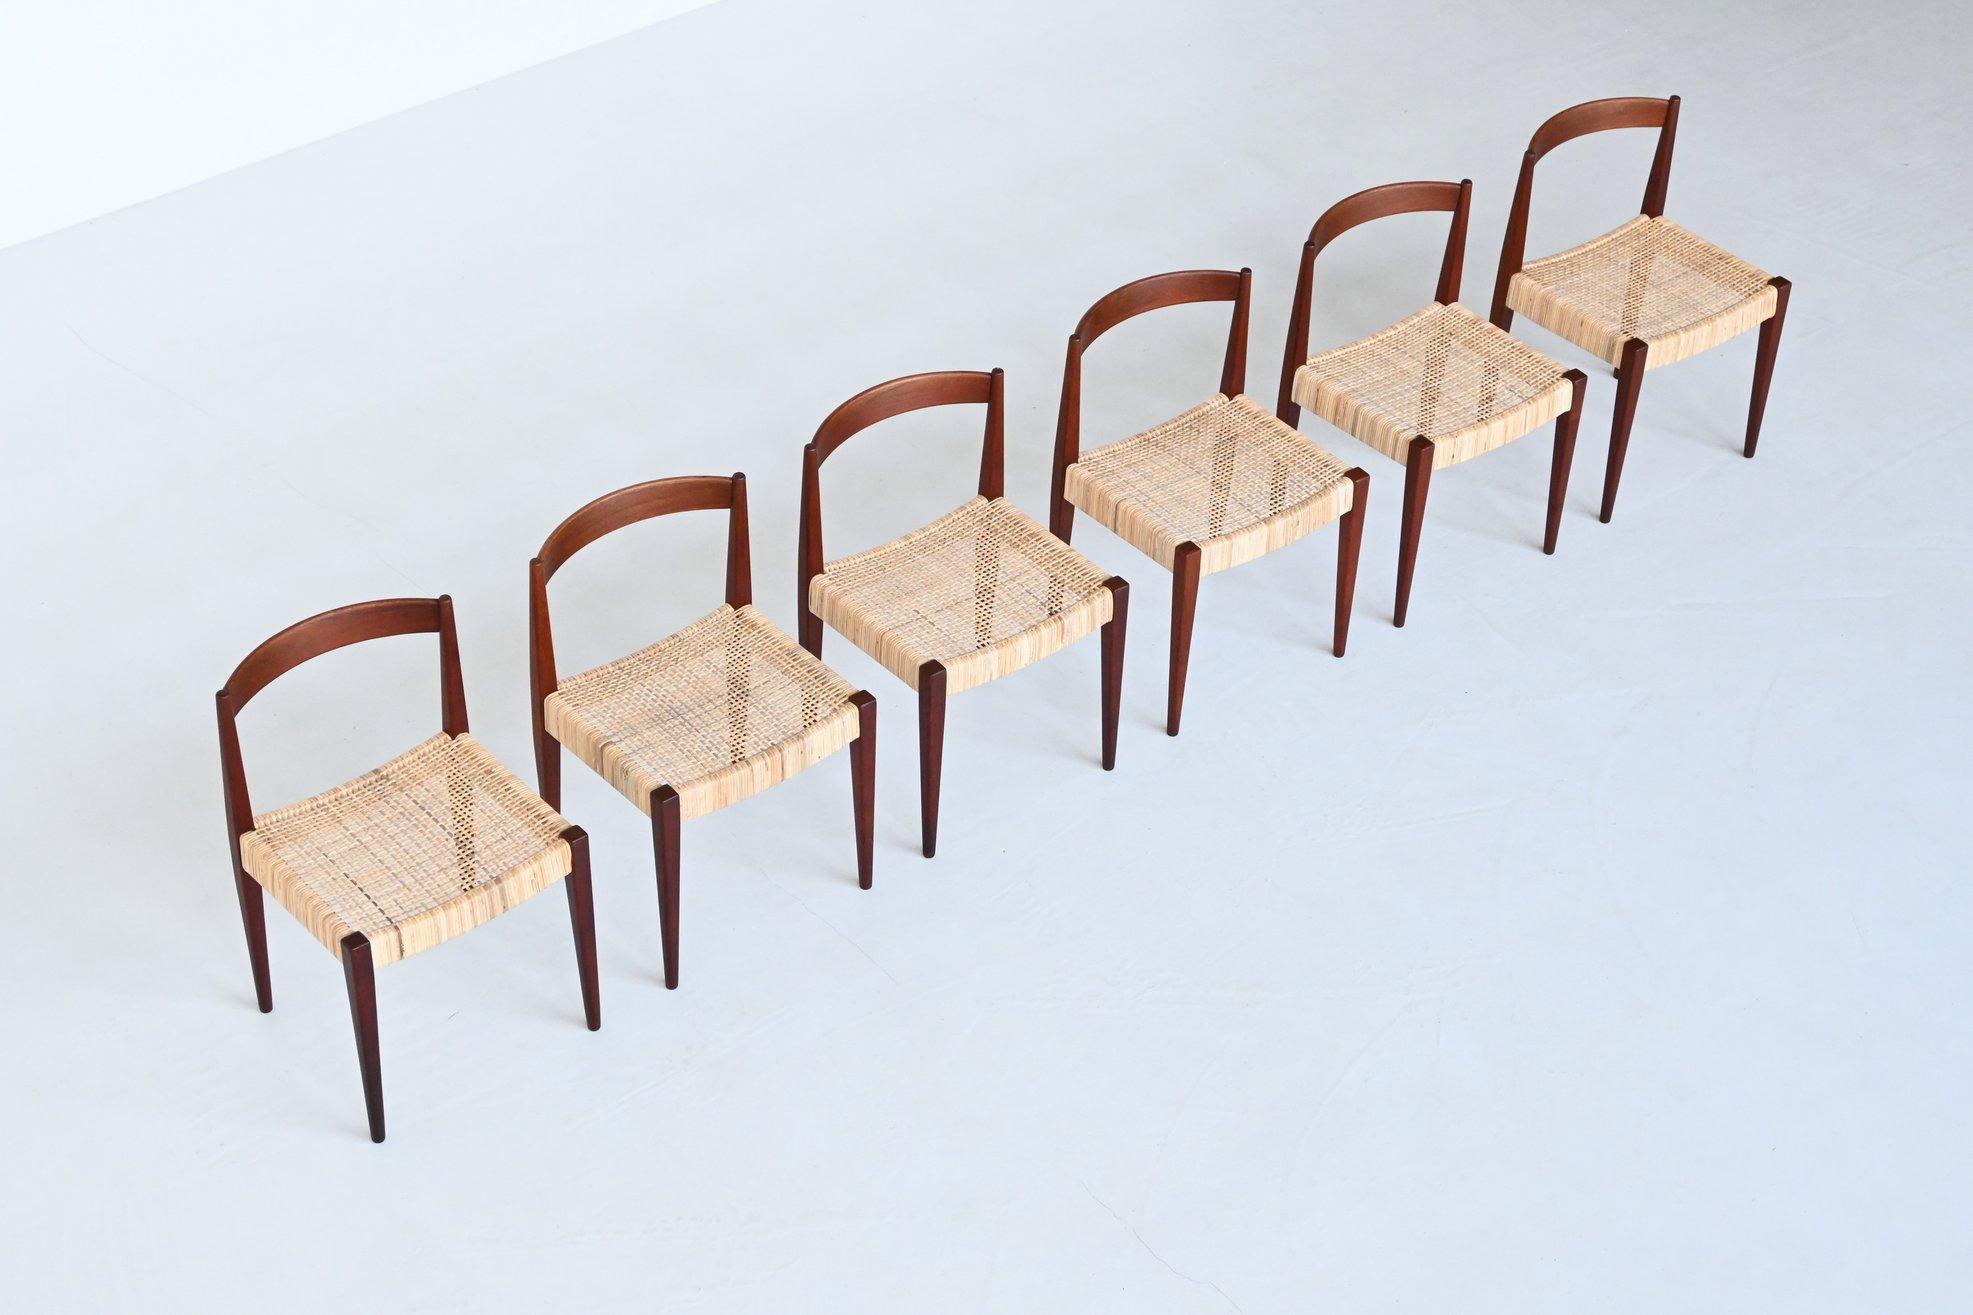 Beautiful set of six dining chairs model 113 designed by Nanna & Jørgen Ditzel for Poul Kolds Savvaerk, Denmark 1955. This dining chair has a solid teak frame with a woven cane seat. They are very nice shaped with beautiful details like the legs